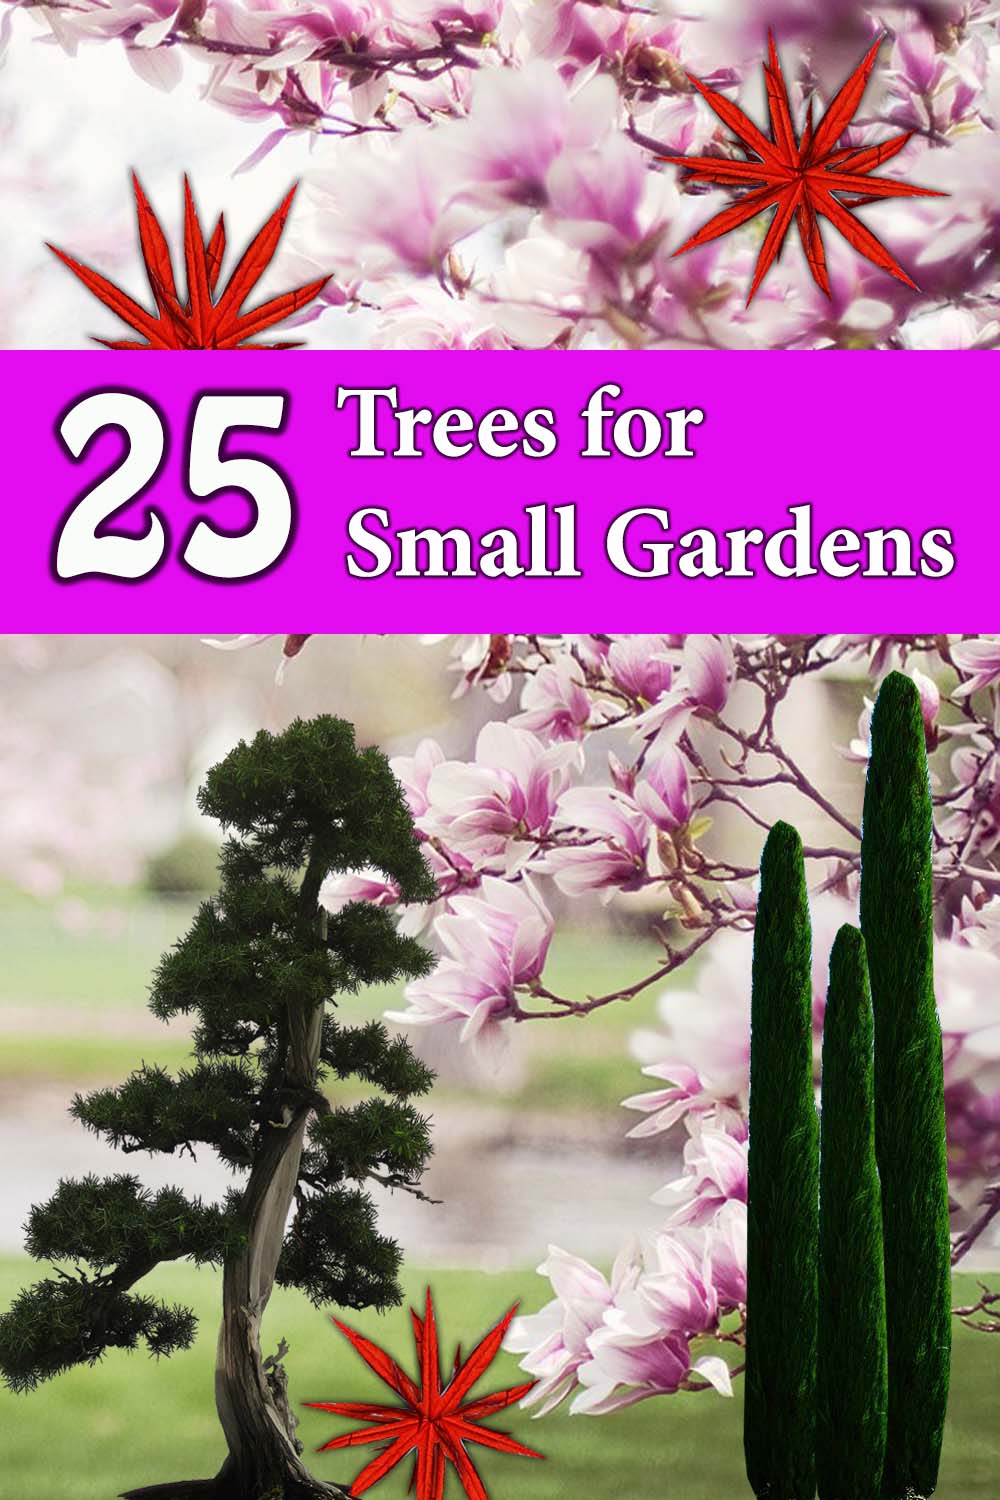 Trees for small gardens